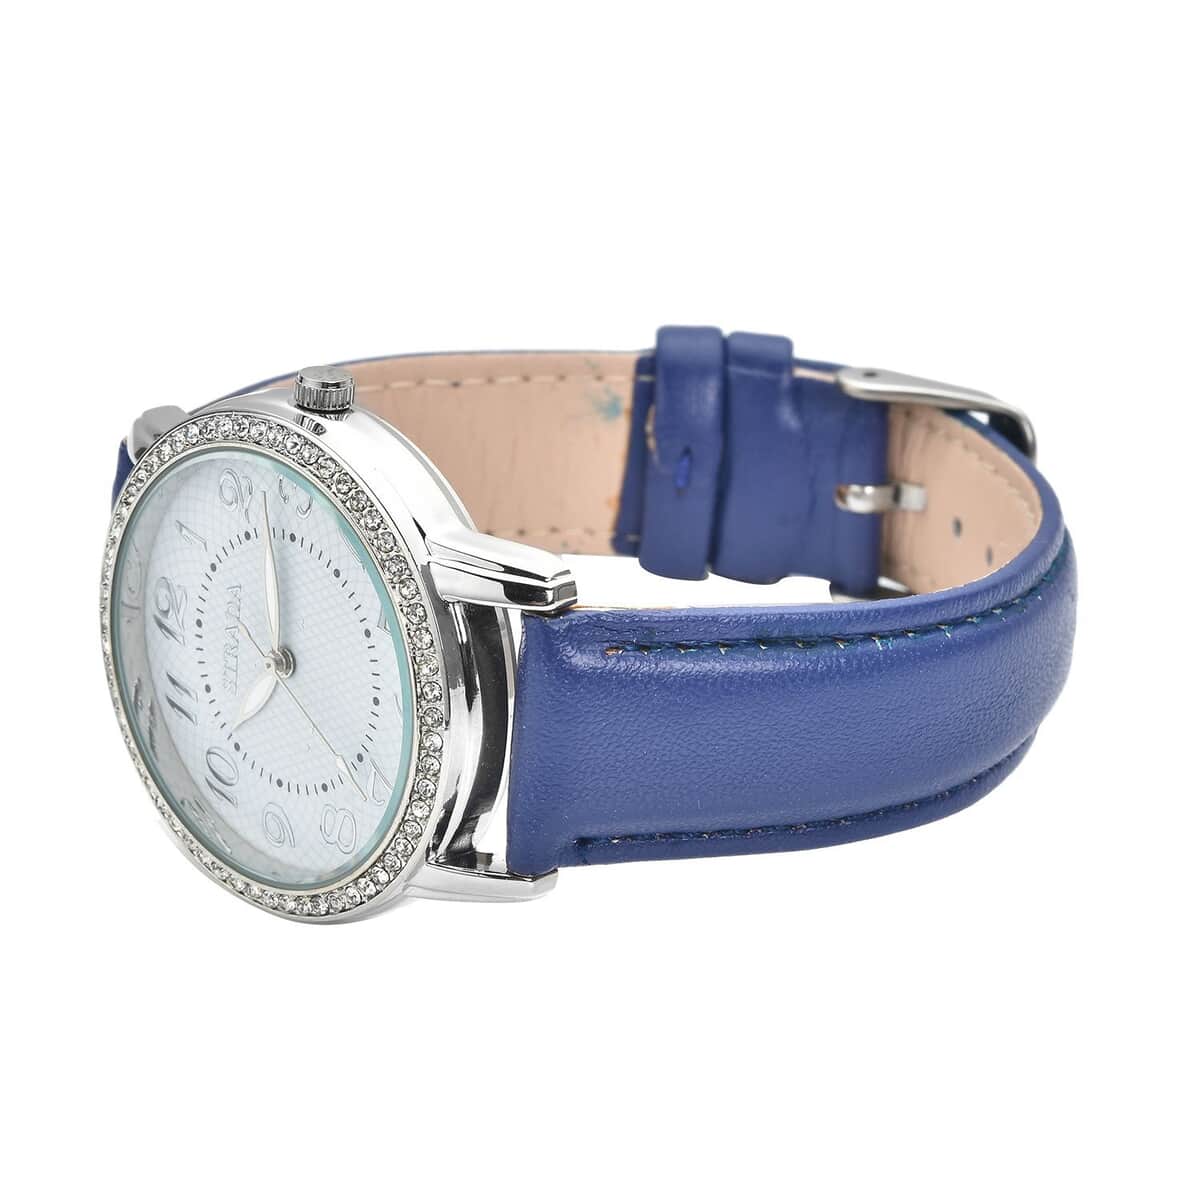 STRADA Austrian Crystal Japanese Movement Watch with Blue Faux Leather Strap (25.40 mm) (5.50-7.25 Inches) image number 4